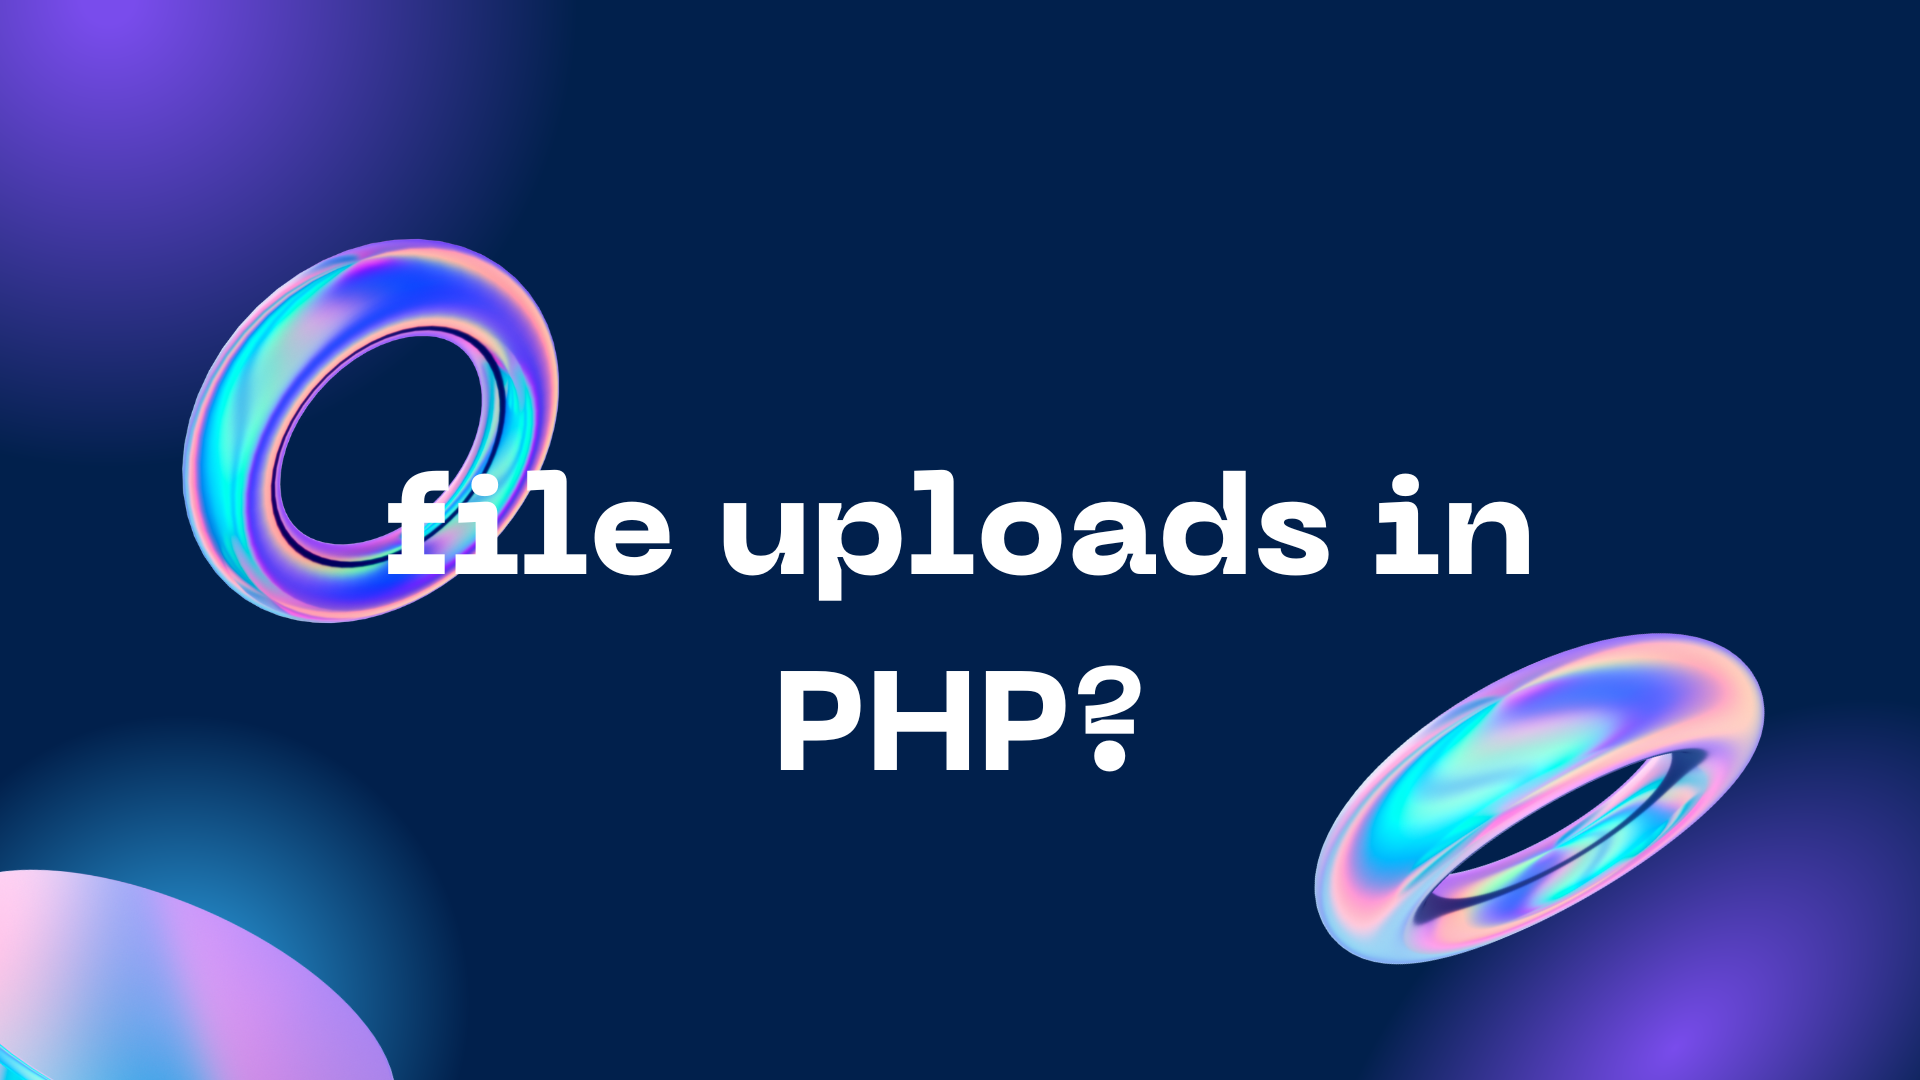 file uploads in PHP?